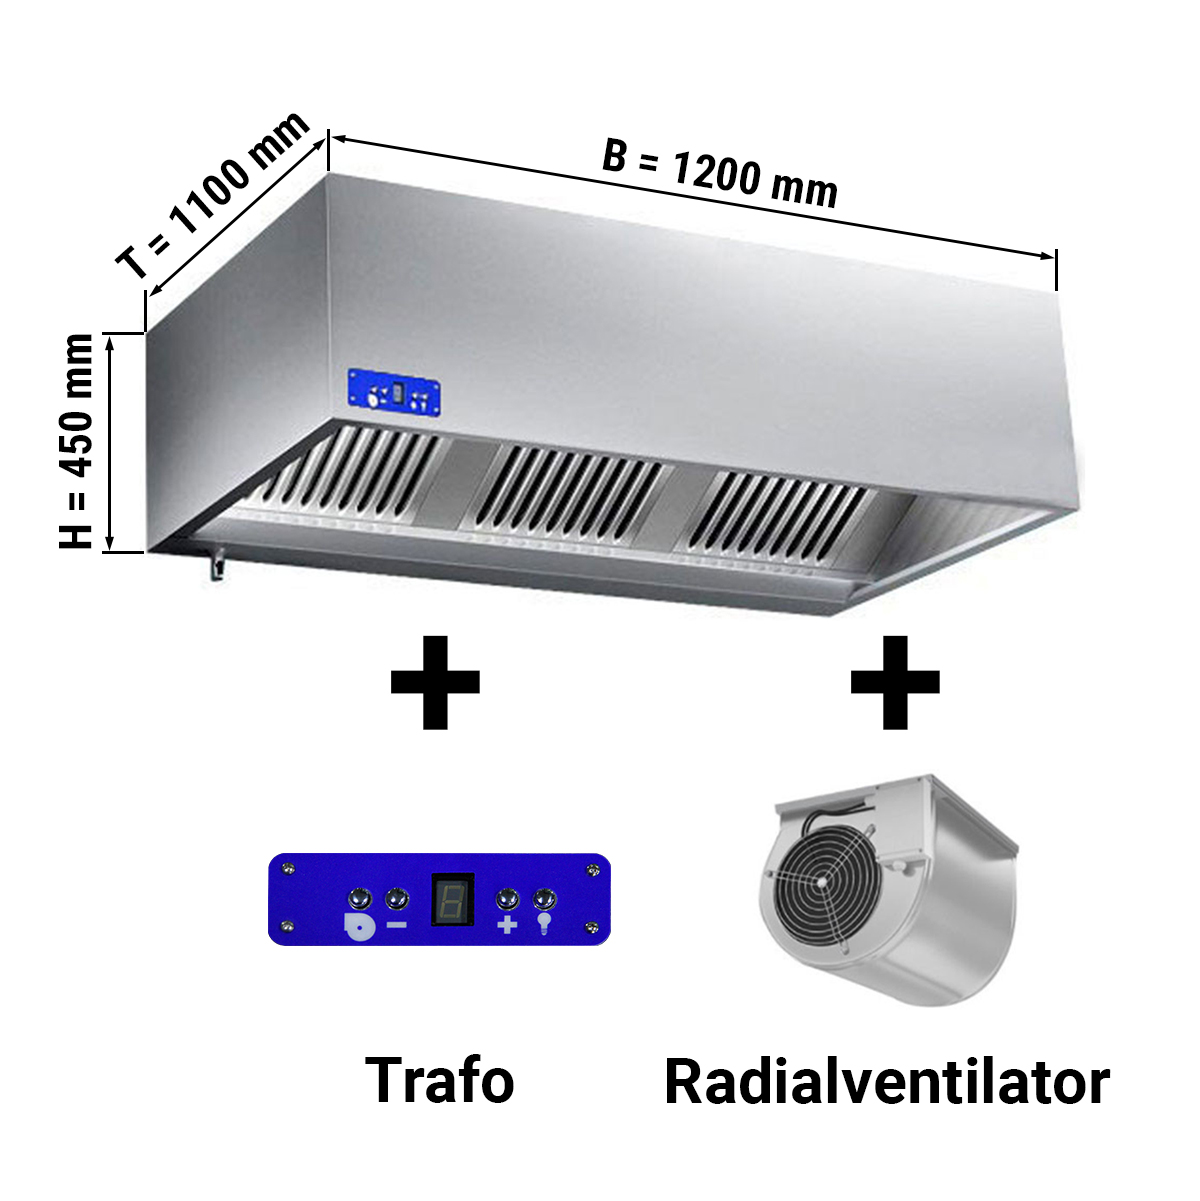 Ventilation hood with motor, controller, filter and lamp 1200X1100X450MM